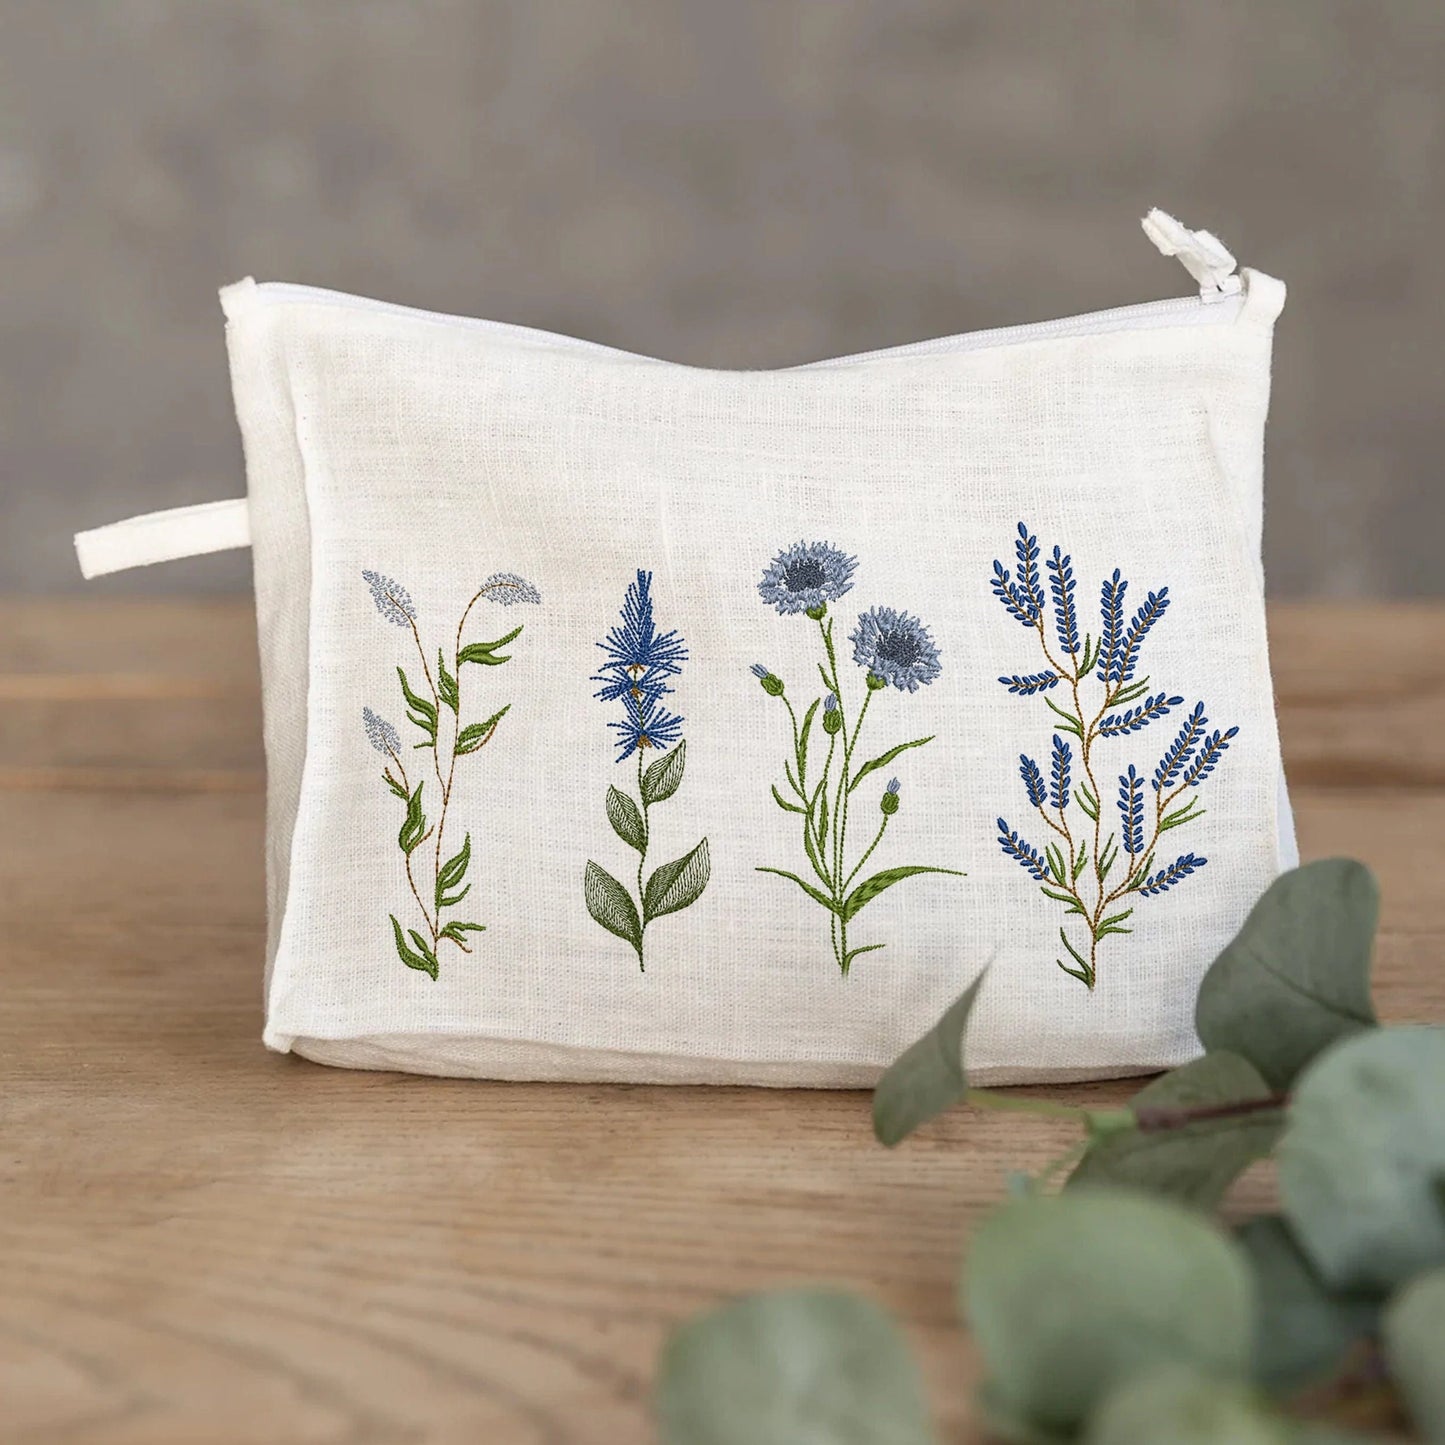 Blue wild flowers flax iris, cornflower forget-me-not machine embroidery designs on cosmetic bag